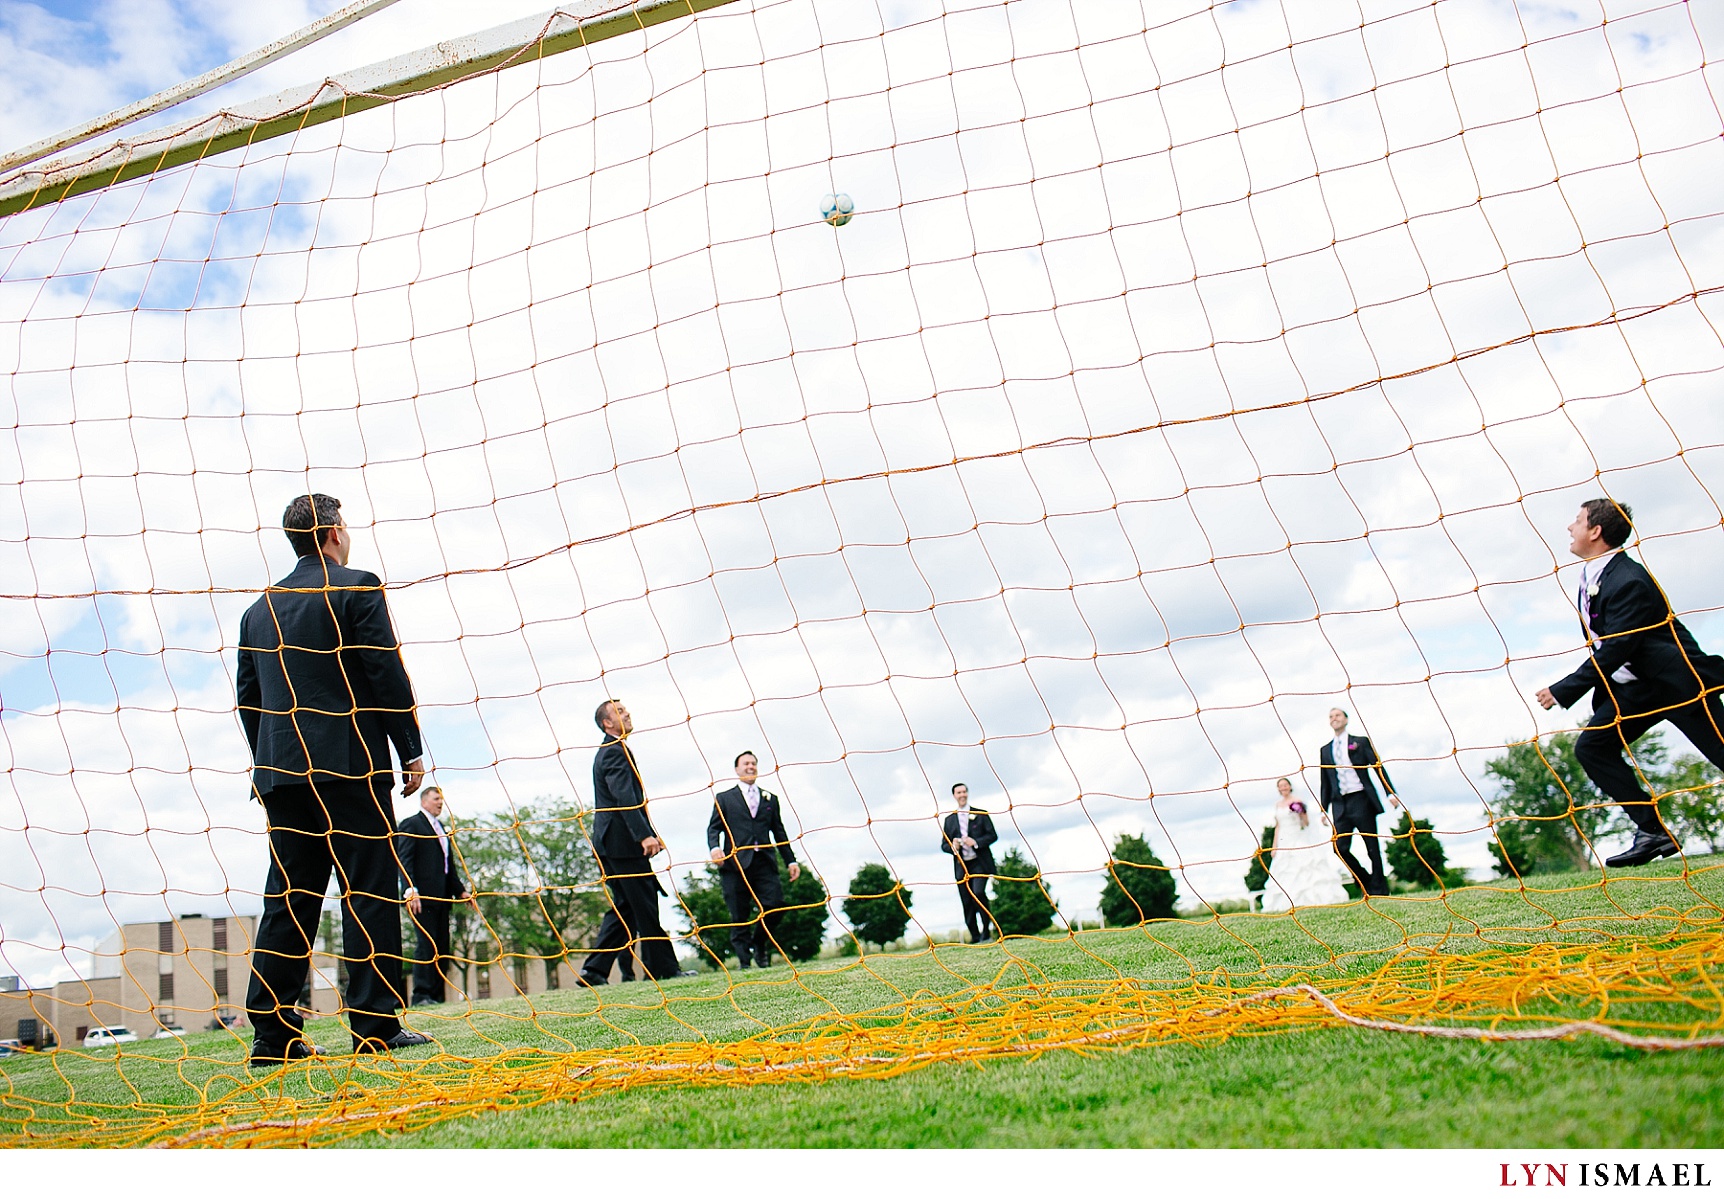 The wedding party plays soccer.